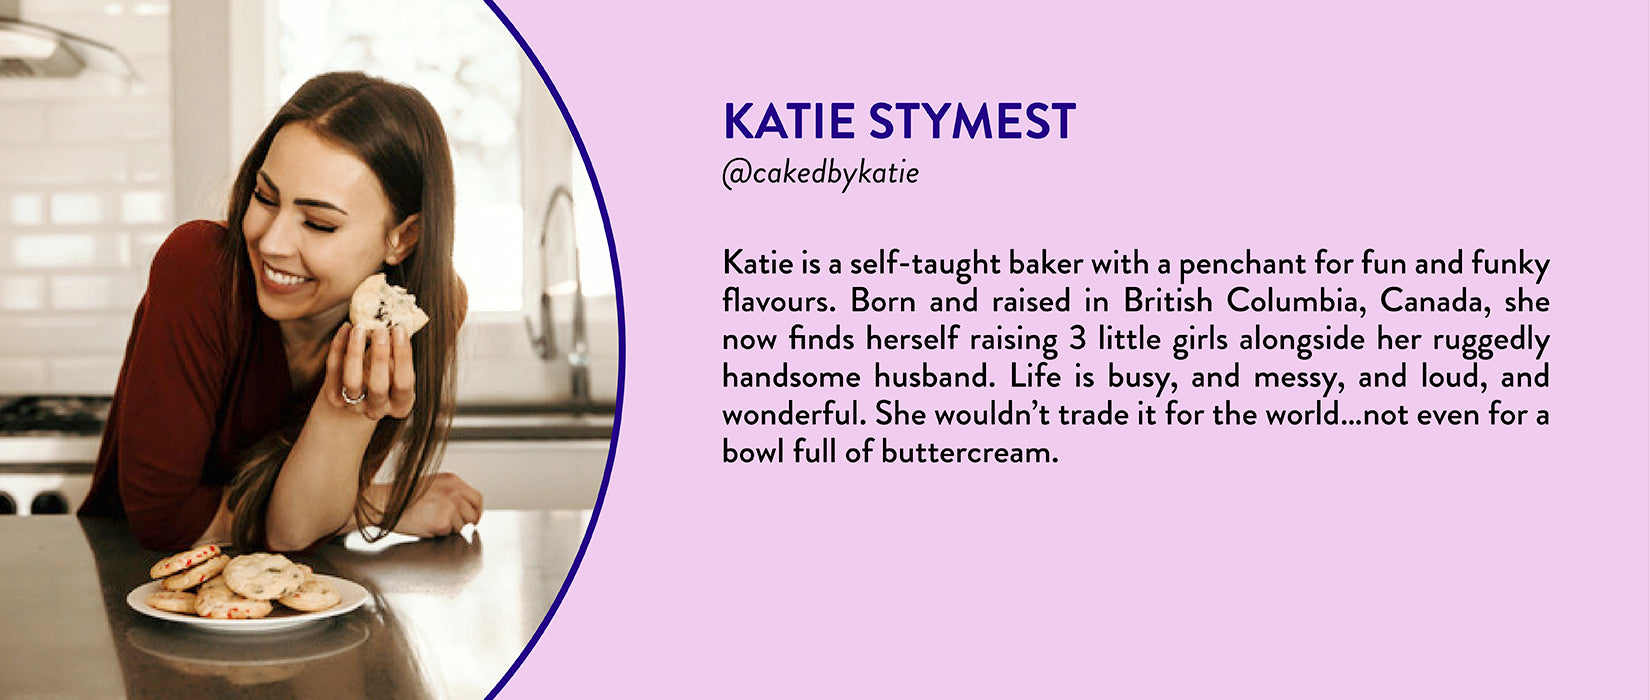 Katie Stymest, @cakedbykatie - Katie is a self-taught baker with a penchant for fun and funky flavours. Born and raised in British Columbia, Canada, she now finds herself raising 3 little girls alongside her ruggedly handsome husband. Life is busy, and messy, and loud, and wonderful. She wouldn’t trade it for the world…not even for a bowl full of buttercream.